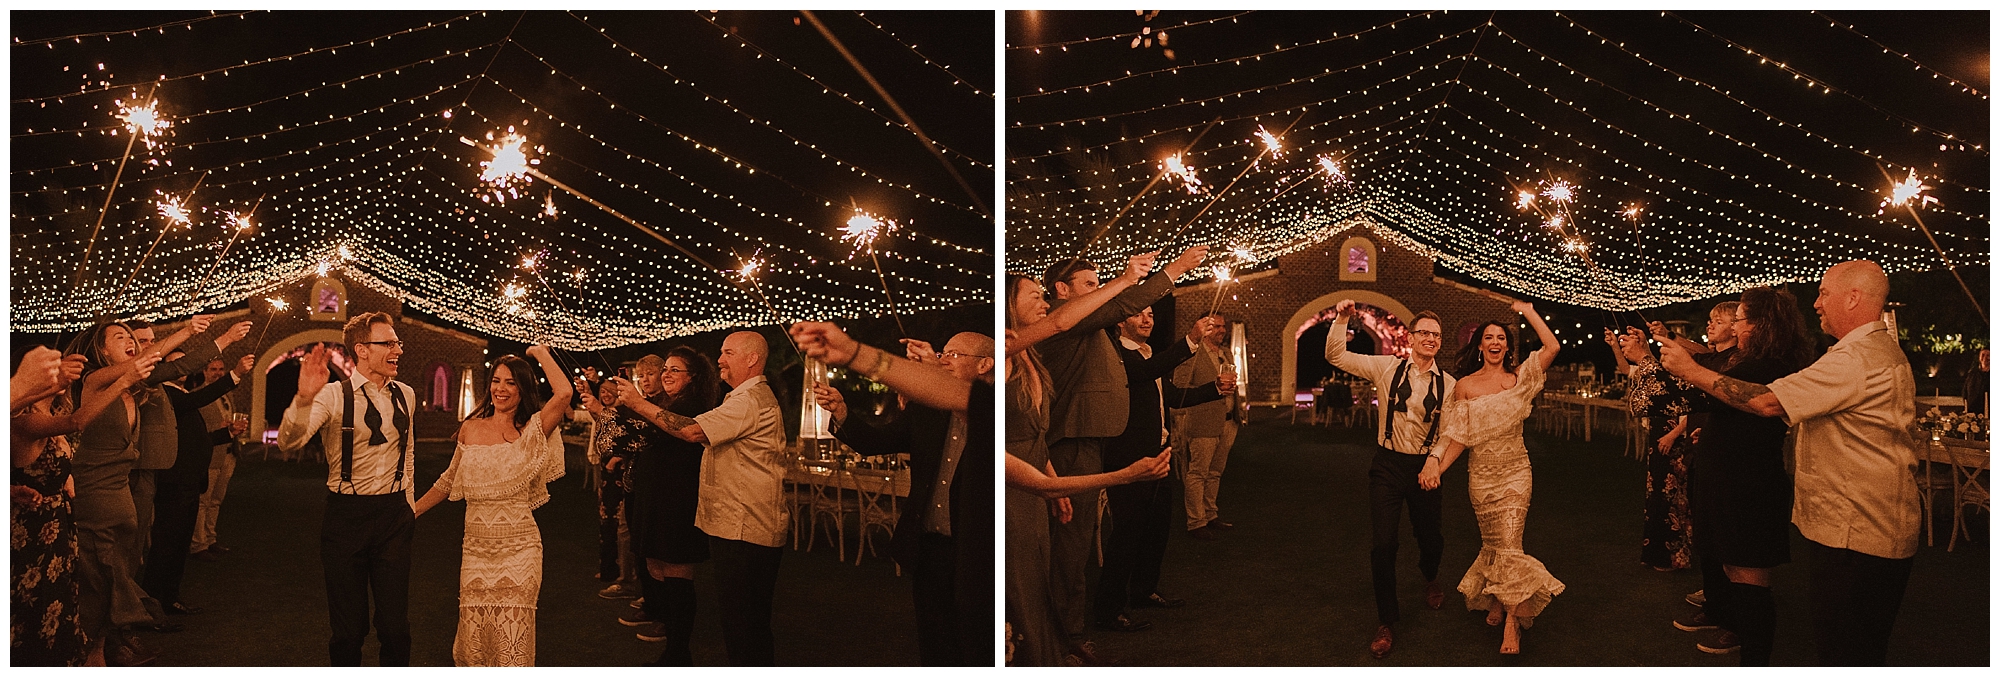 Using sparklers to bid farewell to the happy couple on what was a beautiful Cabo wedding